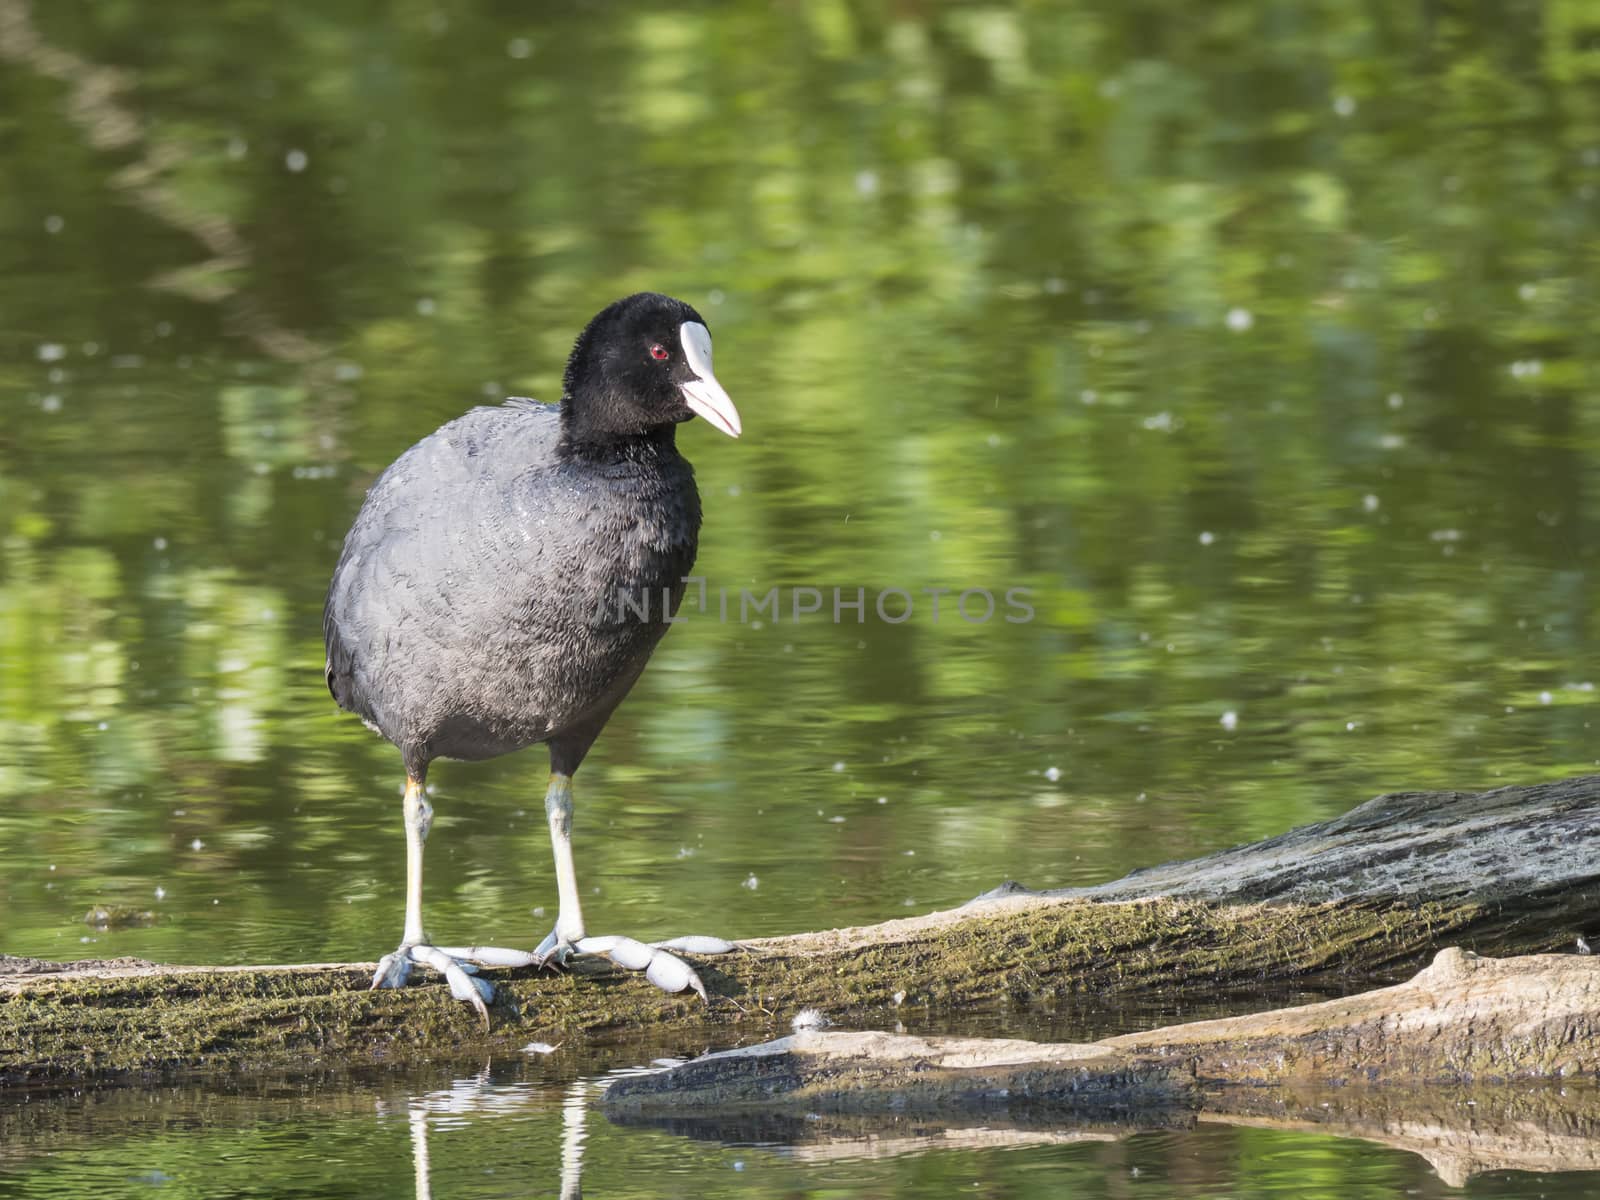 Close up portrait of Eurasian coot Fulica atra, also known as the common coot standing on tree log in water of green pond, selective focus, copy space.